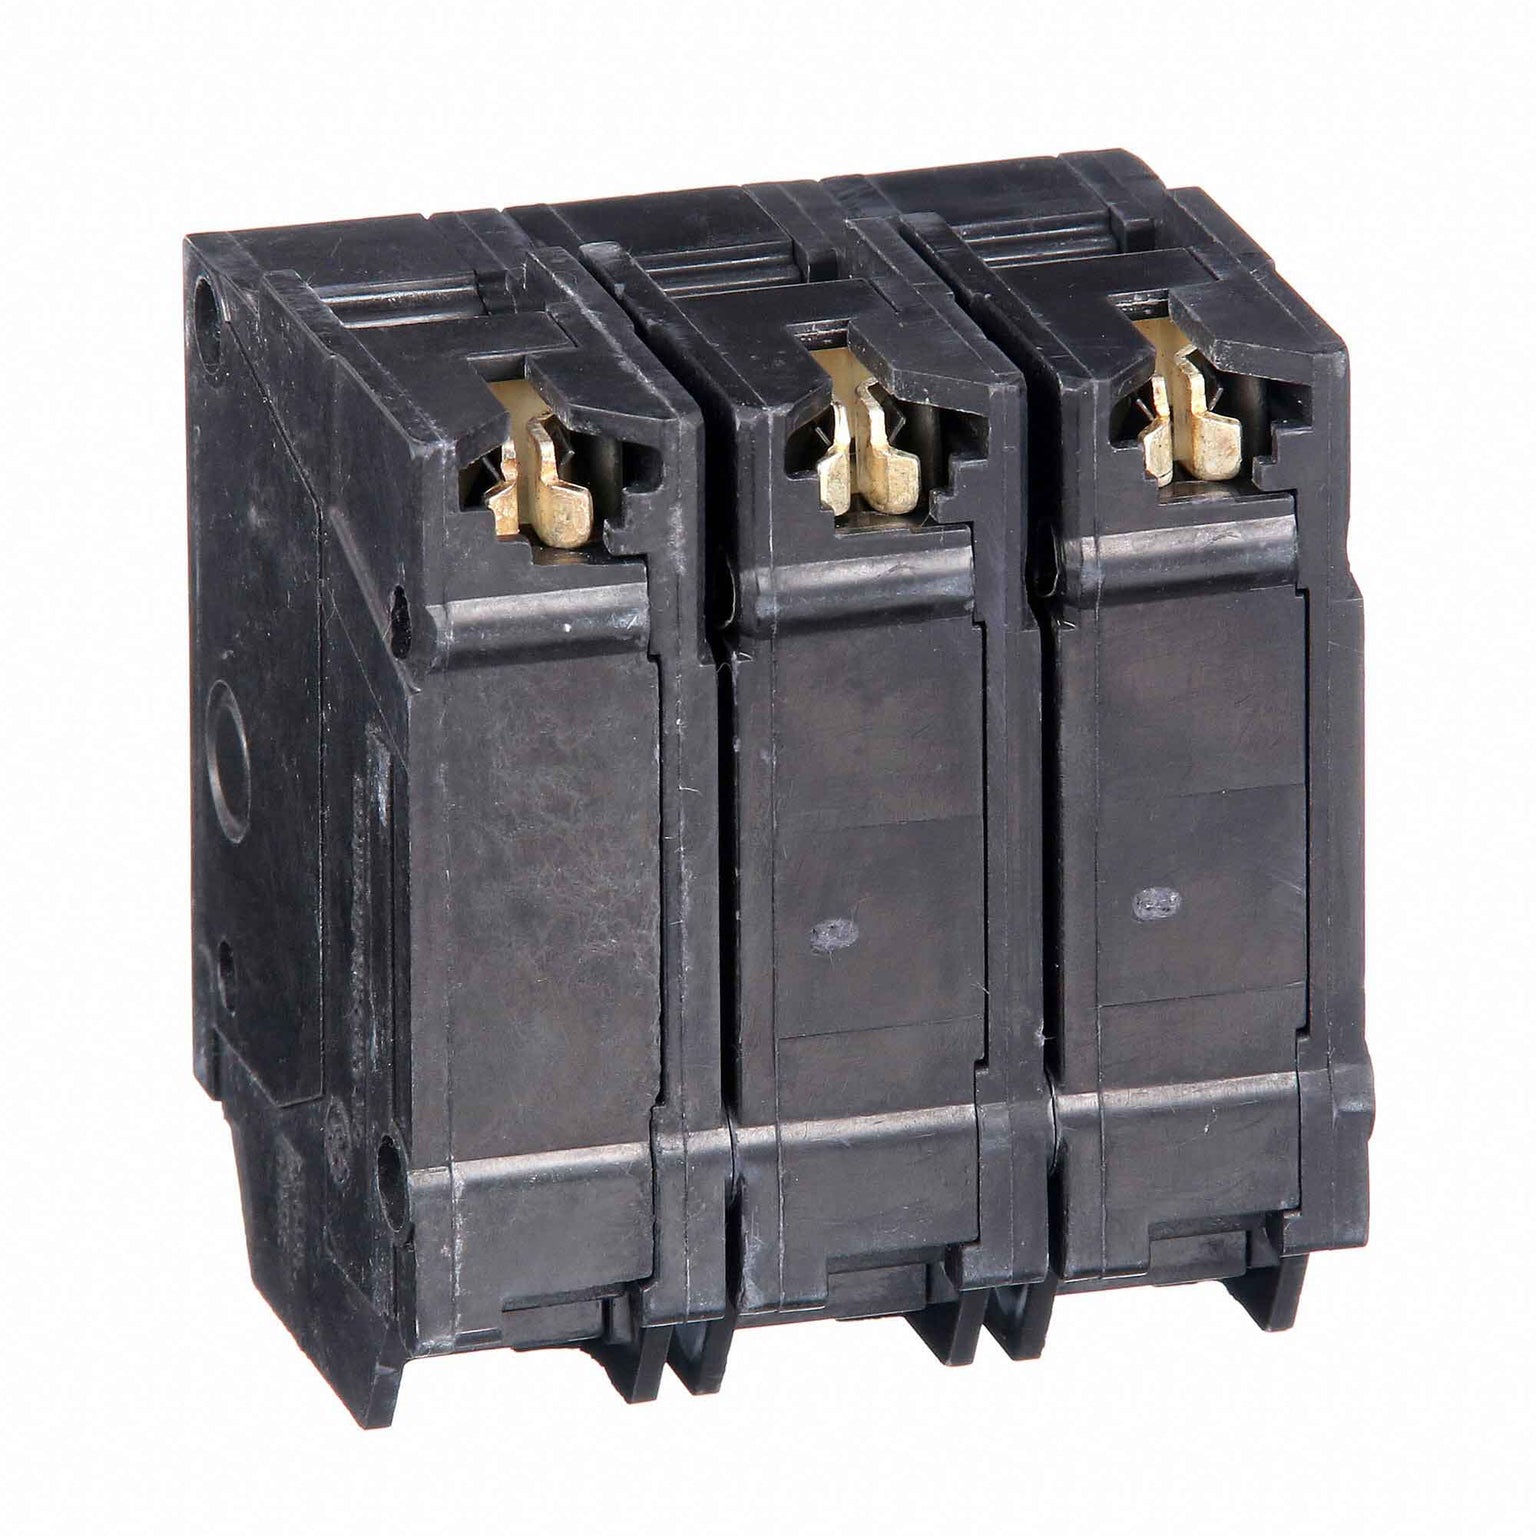 THHQL32020 - General Electrics - Molded Case Circuit Breakers